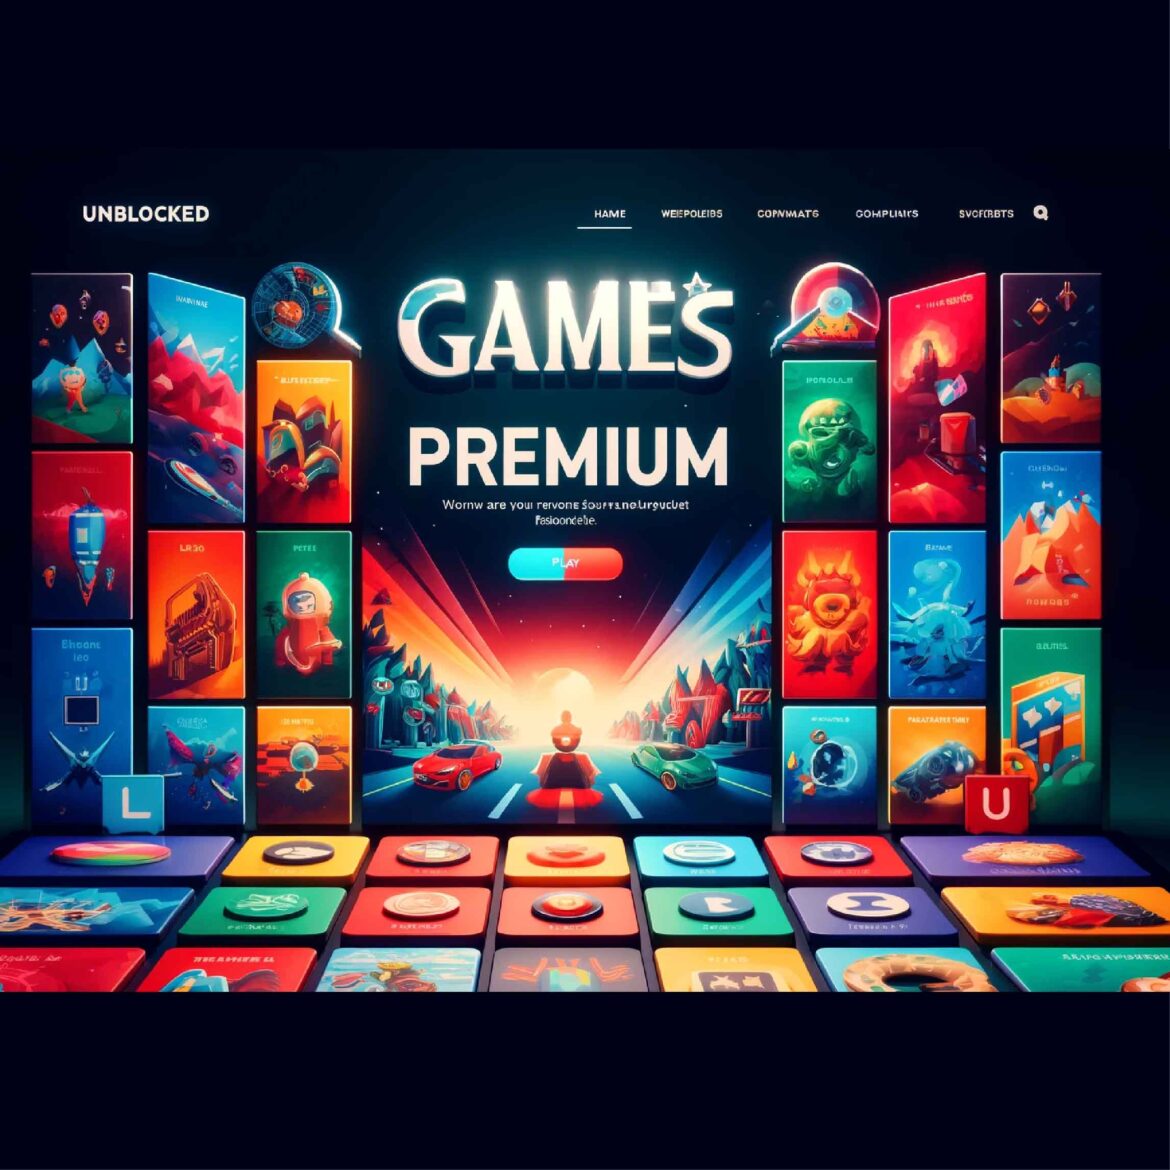 Unblocked Games Premium The Ultimate Guide to Limitless Gaming